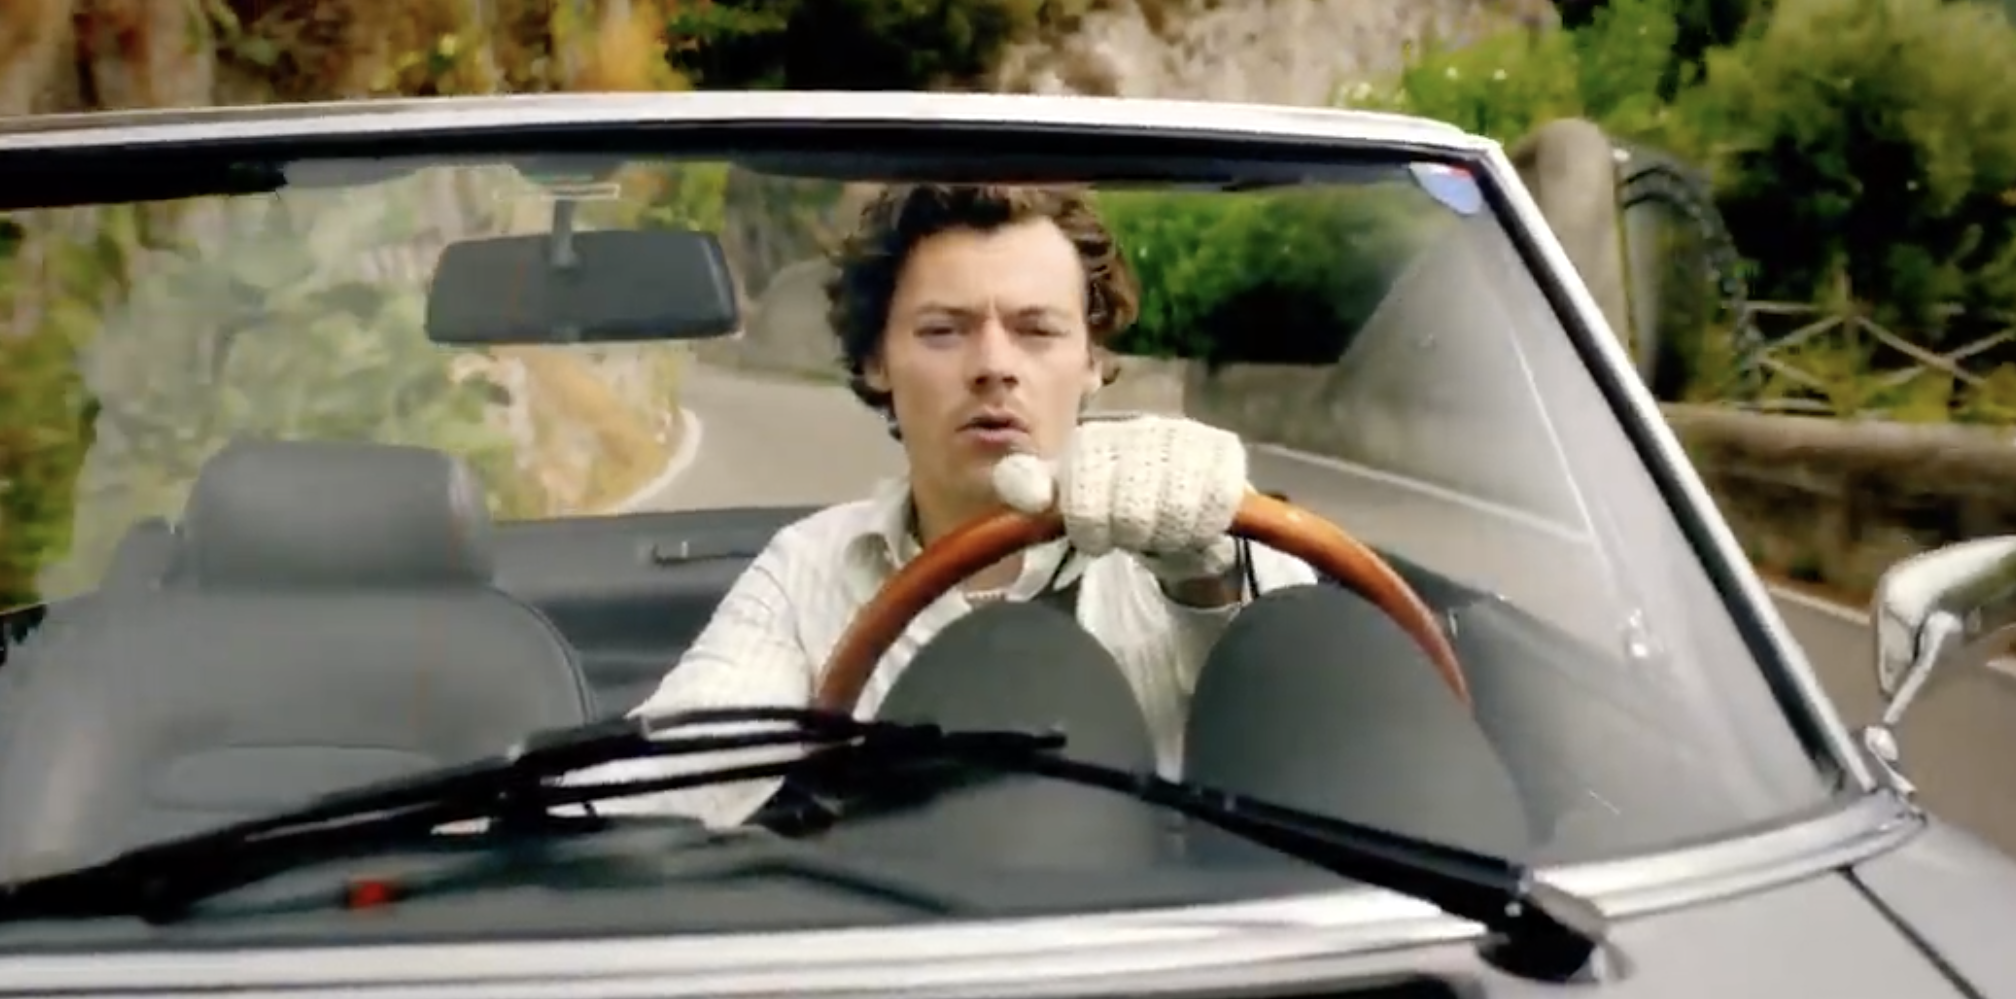 Harry driving a car with the top down while wearing driving gloves